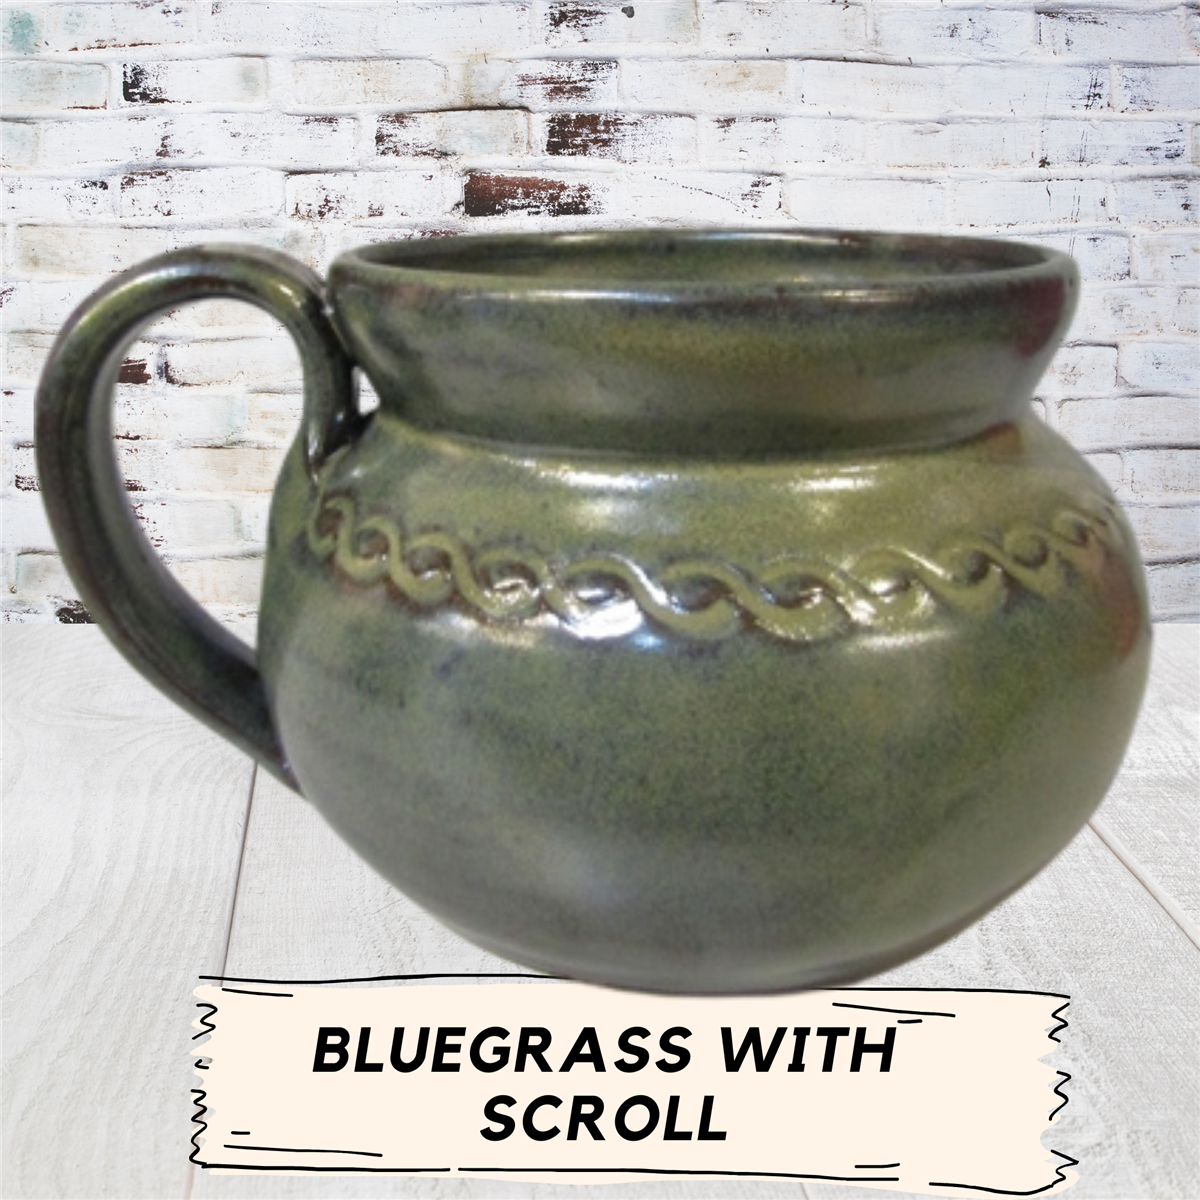 Chili bowl with handle holds 16 ounces handmade pottery bowl for soup ice cream salad.